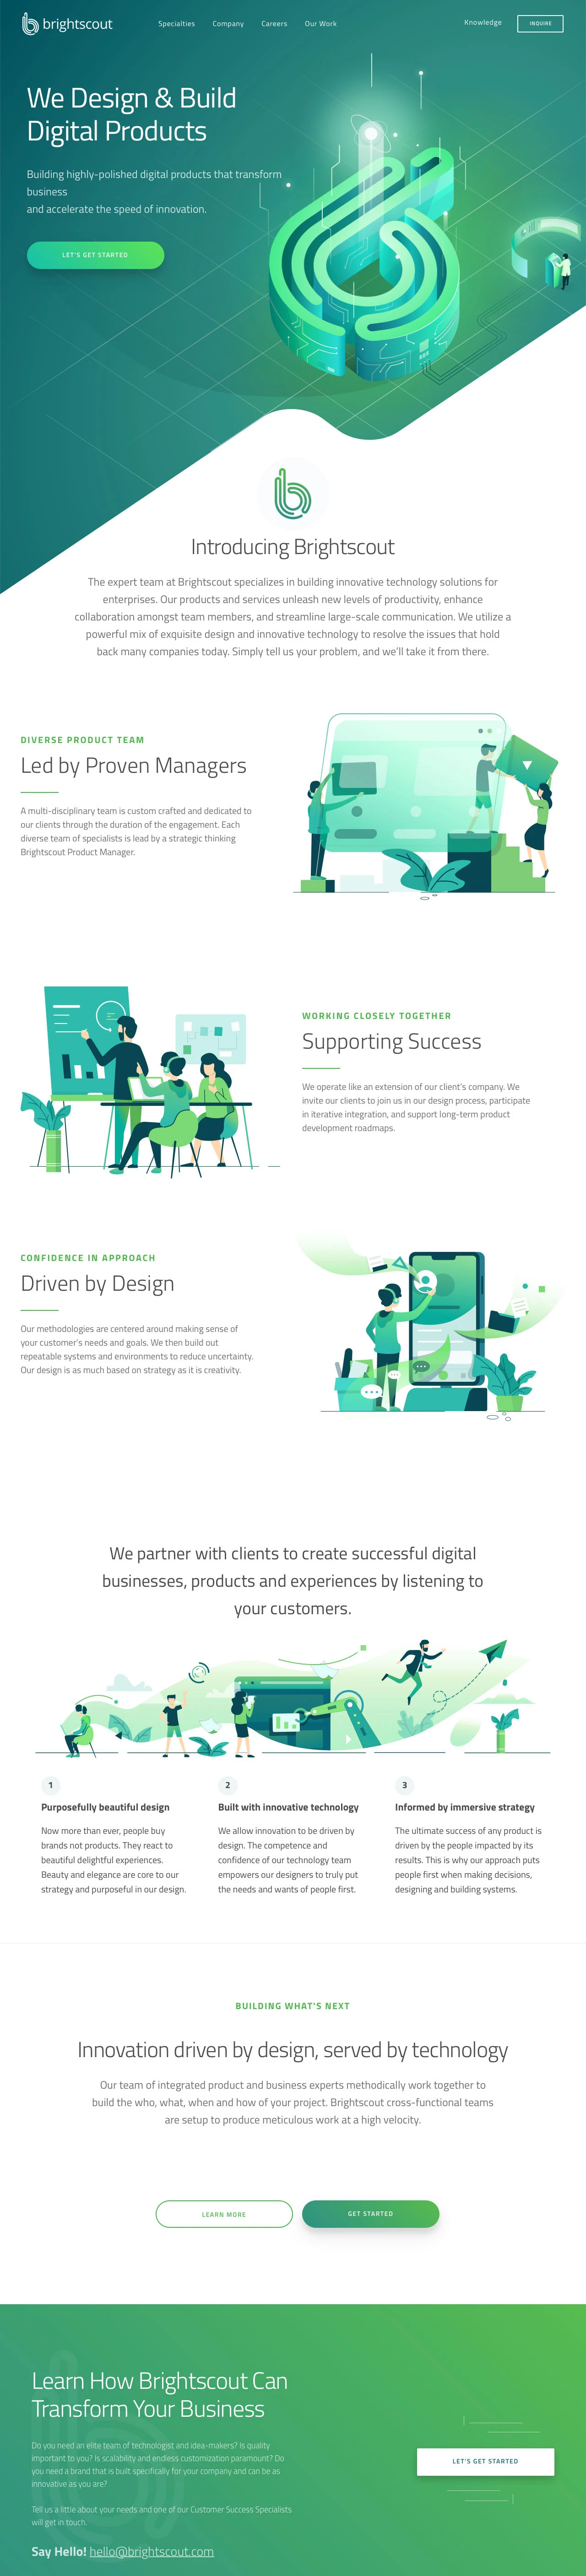 Brightscout Landing Page Example: Building highly-polished digital products that transform business and accelerate the speed of innovation.